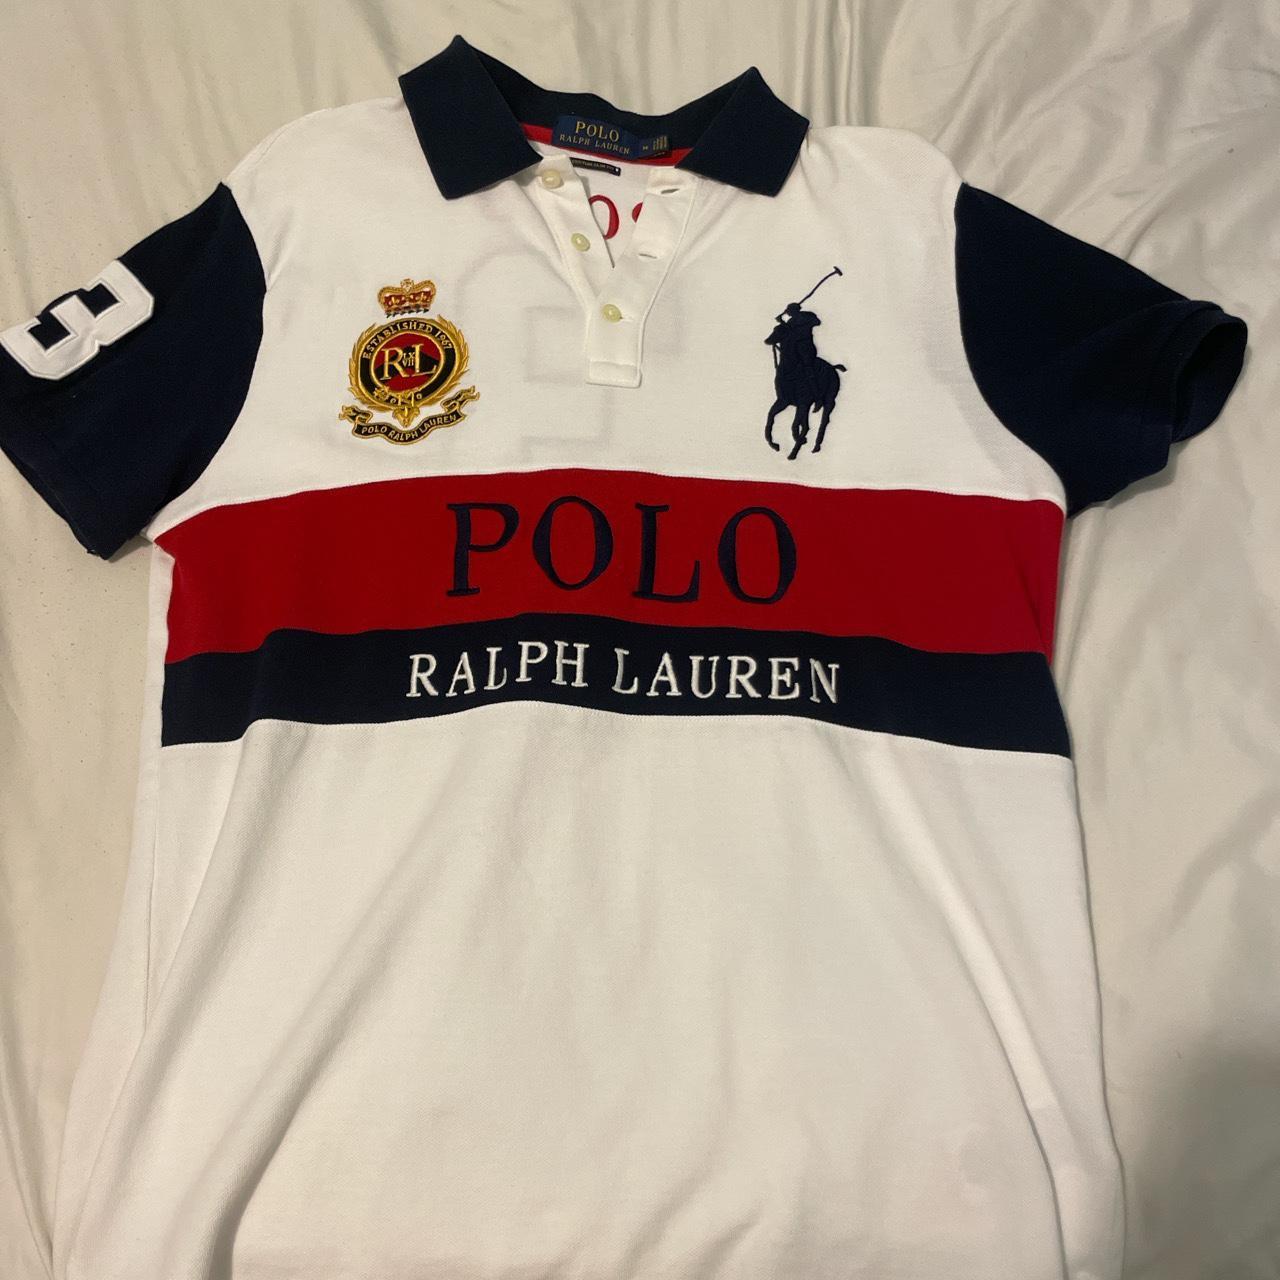 Polo shirt Only used once - Depop